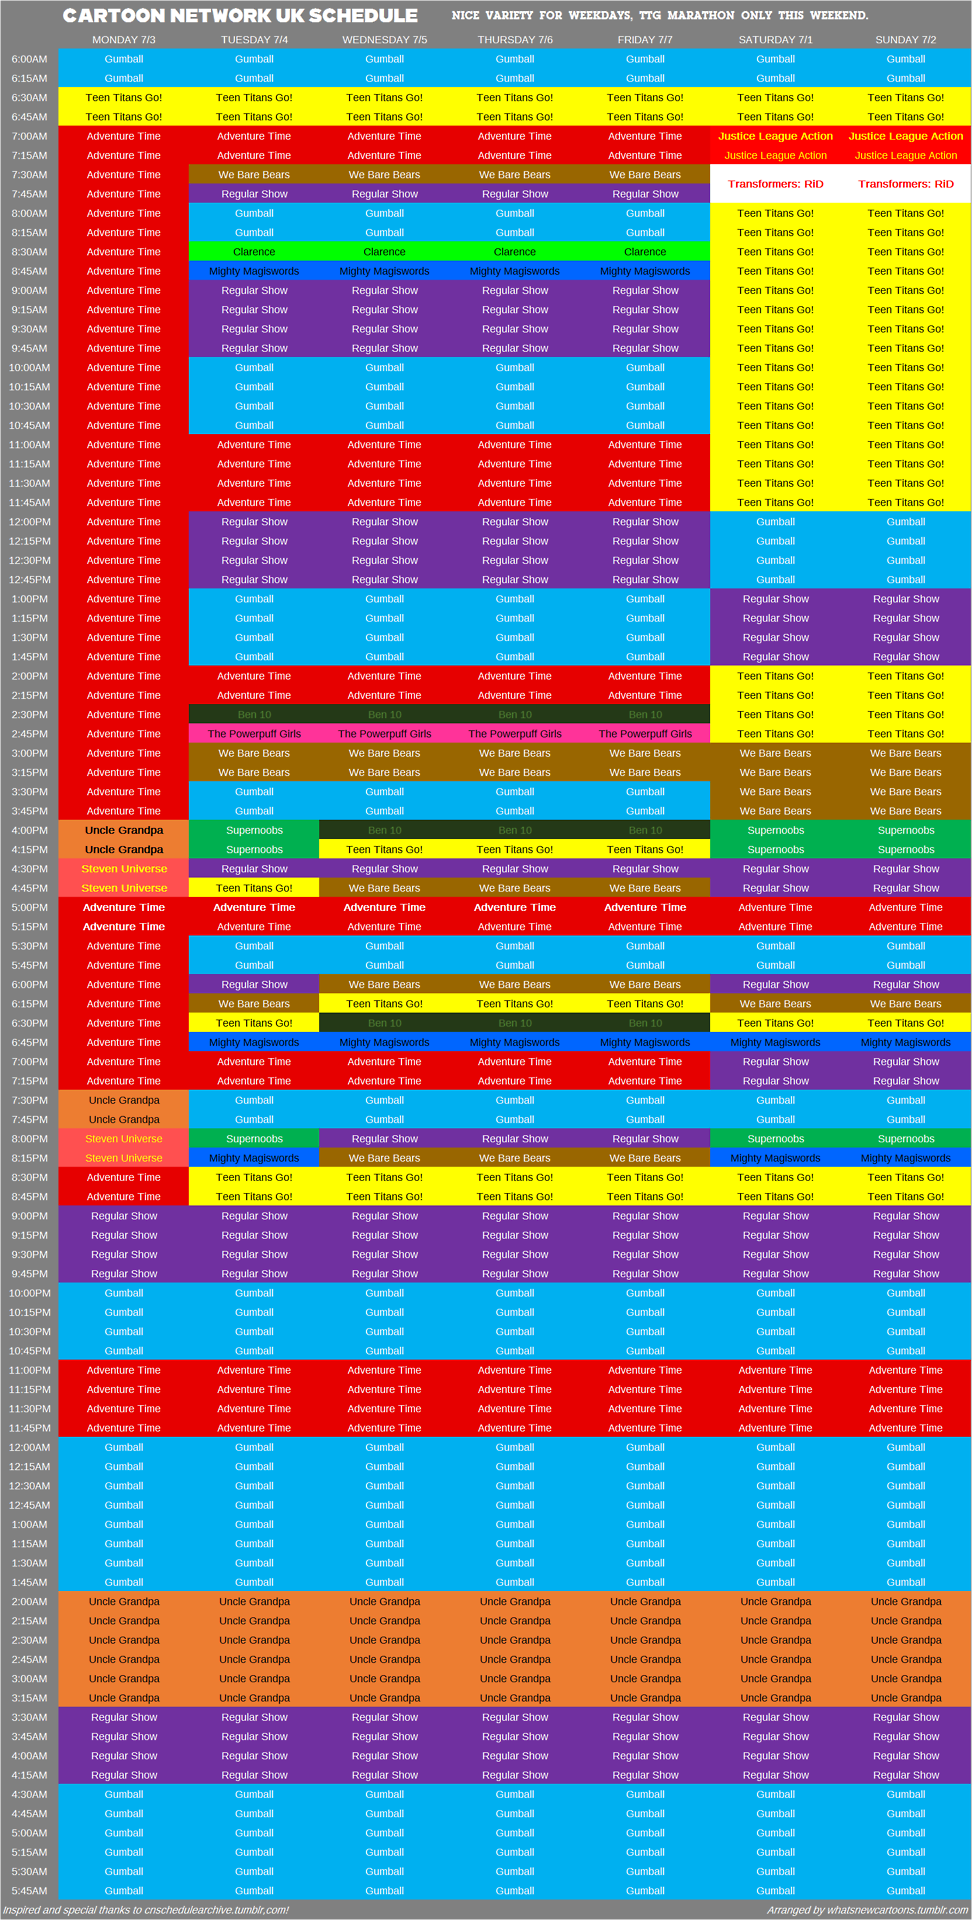 WHAT'S NEW CARTOONS? cartoon premieres and ratings — Here's a schedule for Cartoon  Network UK for this...